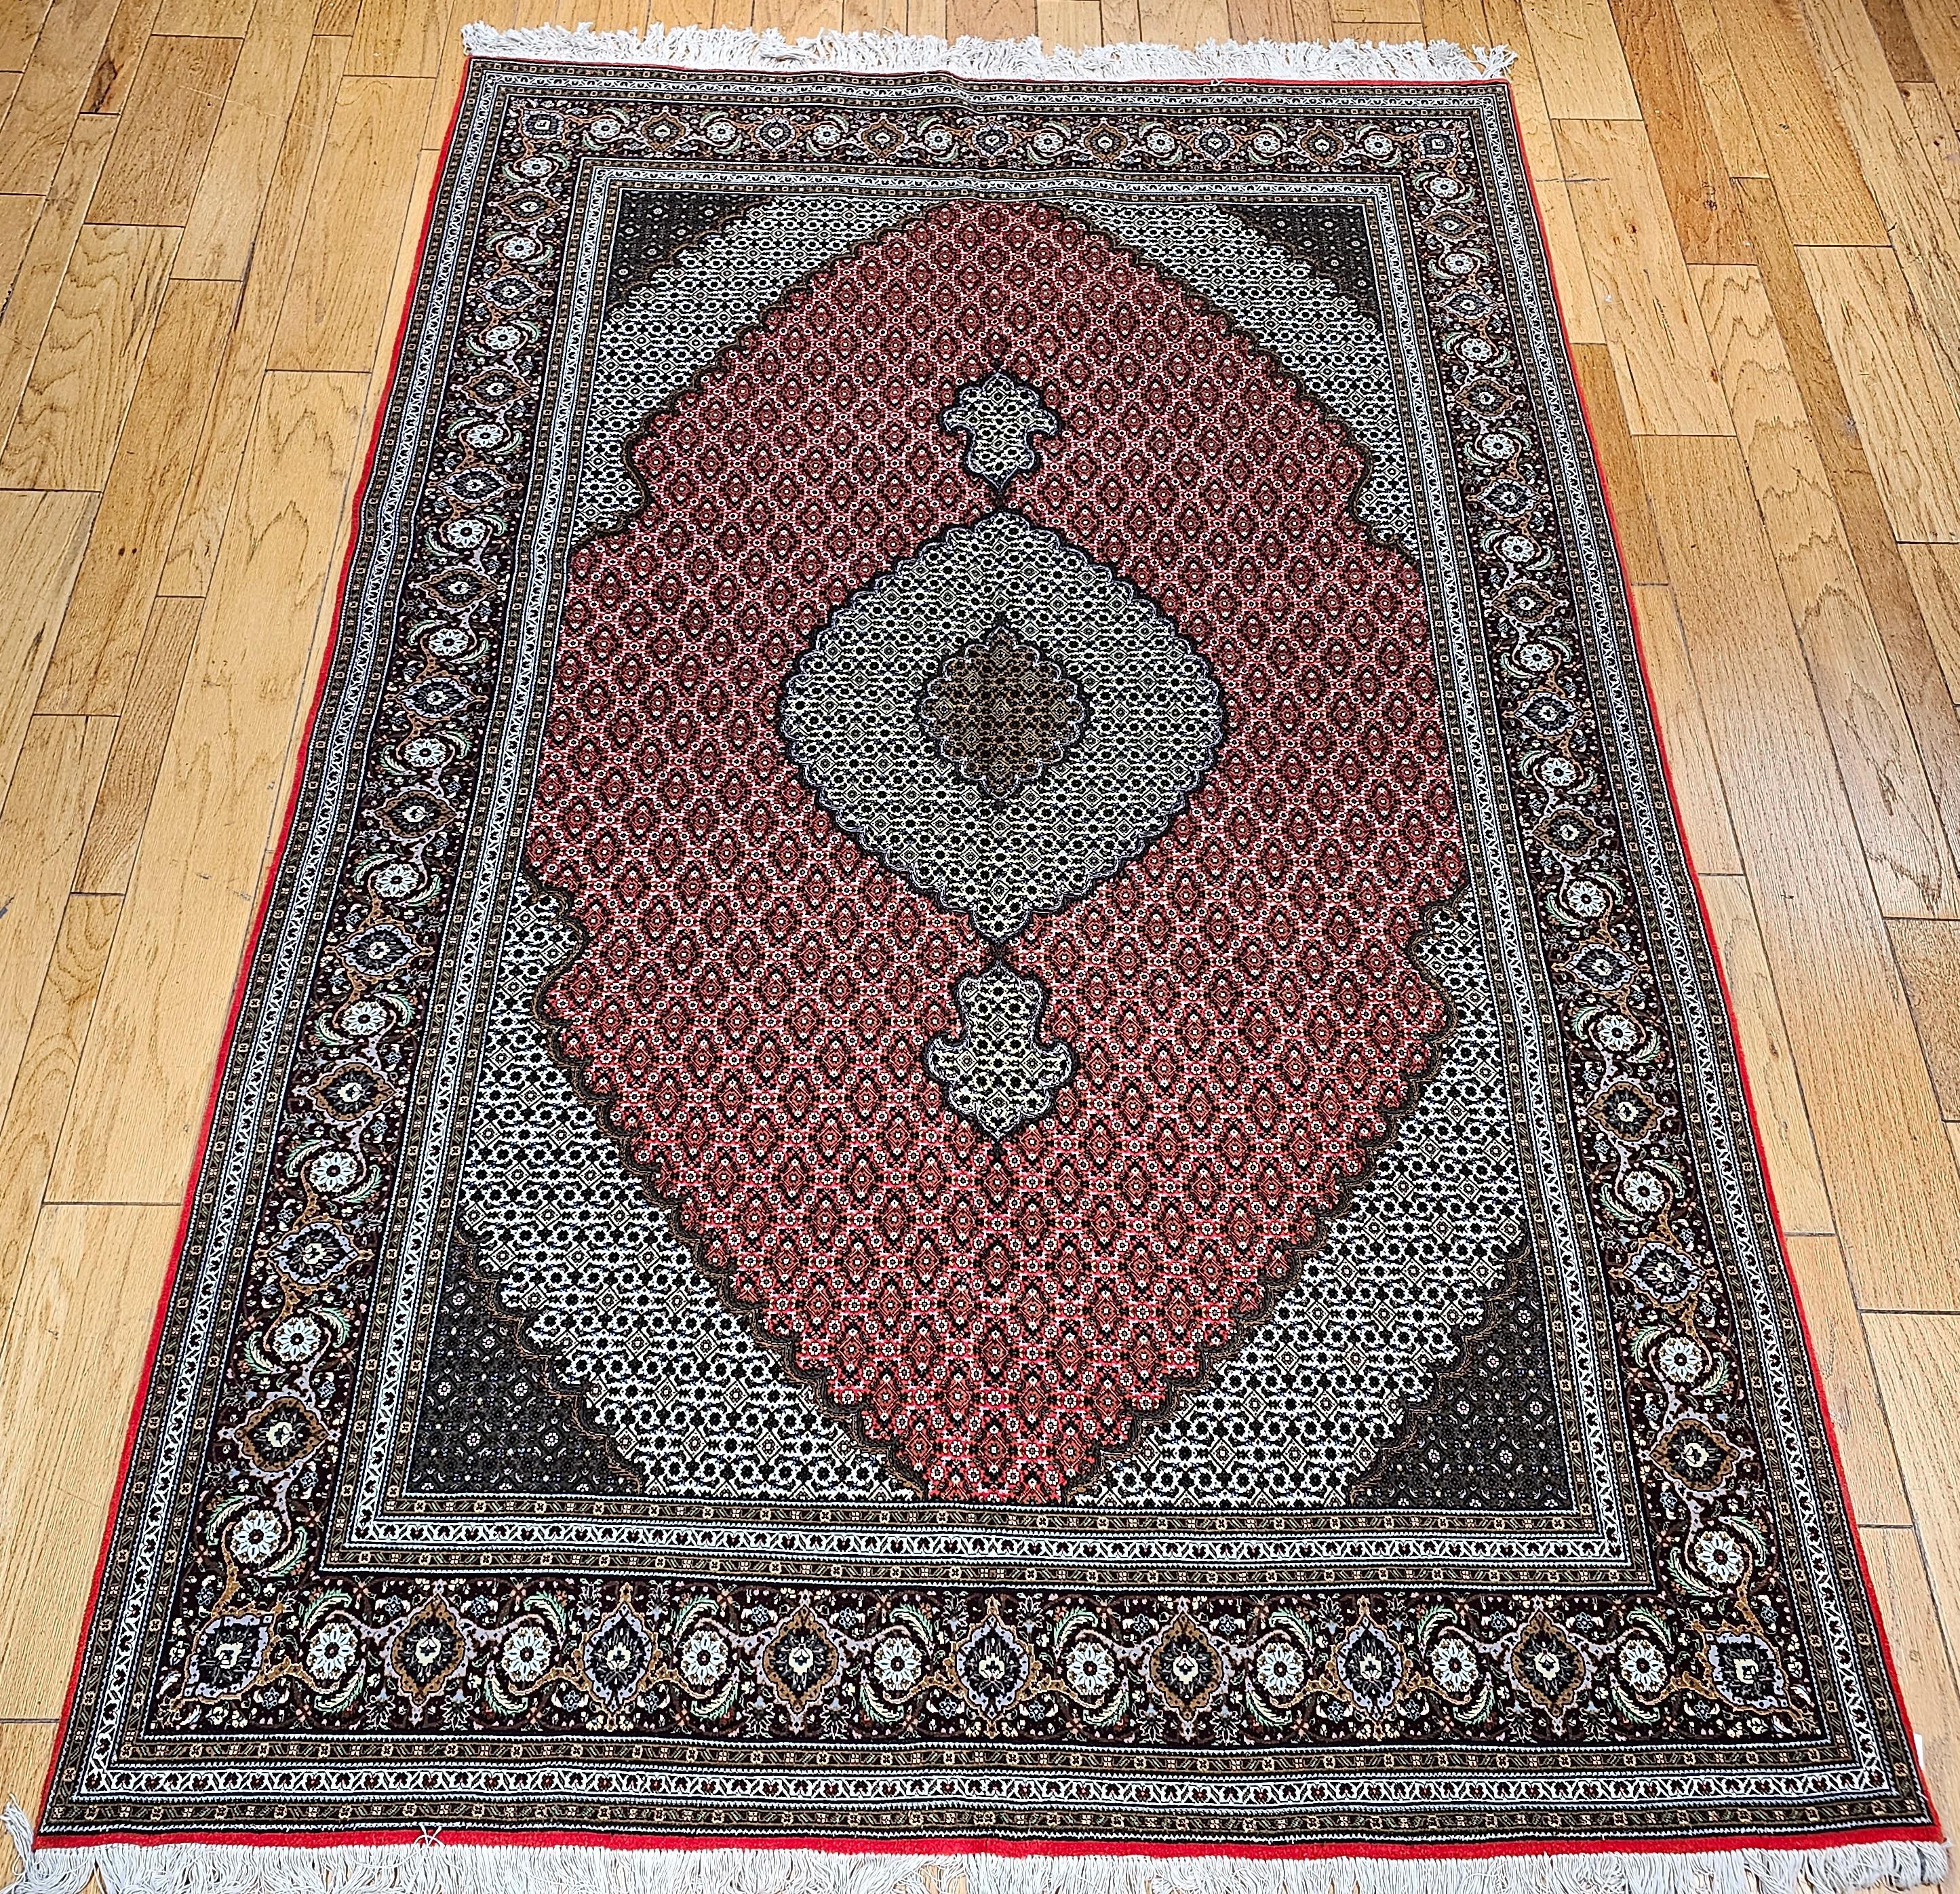 Vintage Persian Tabriz in Mahi (Fish) pattern with silk highlights from the 3rd quarter of the 1900s.  The classic geometric pattern is loved in Persia and is hand-knotted in several cities in the Azerbaijan Province of Persia.  The best of these